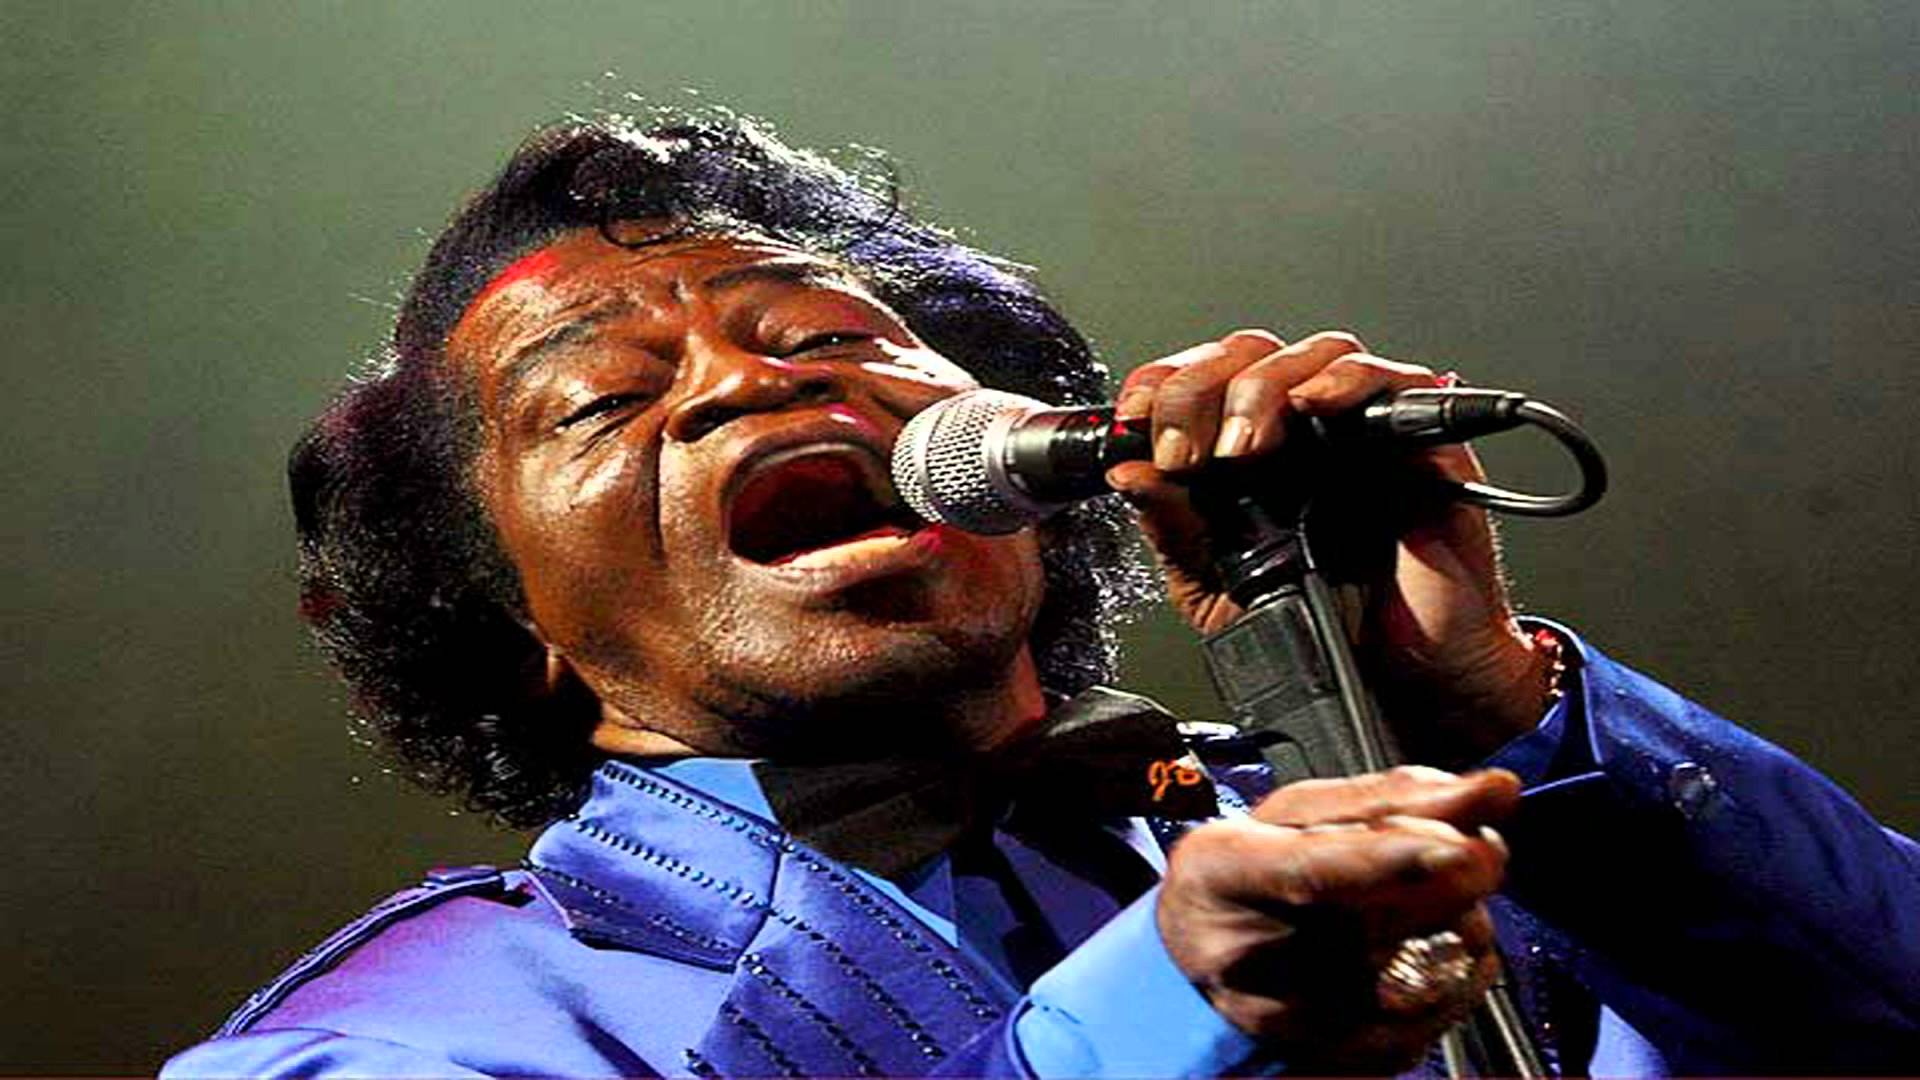 james brown wallpapers high resolution and quality download on james brown wallpapers